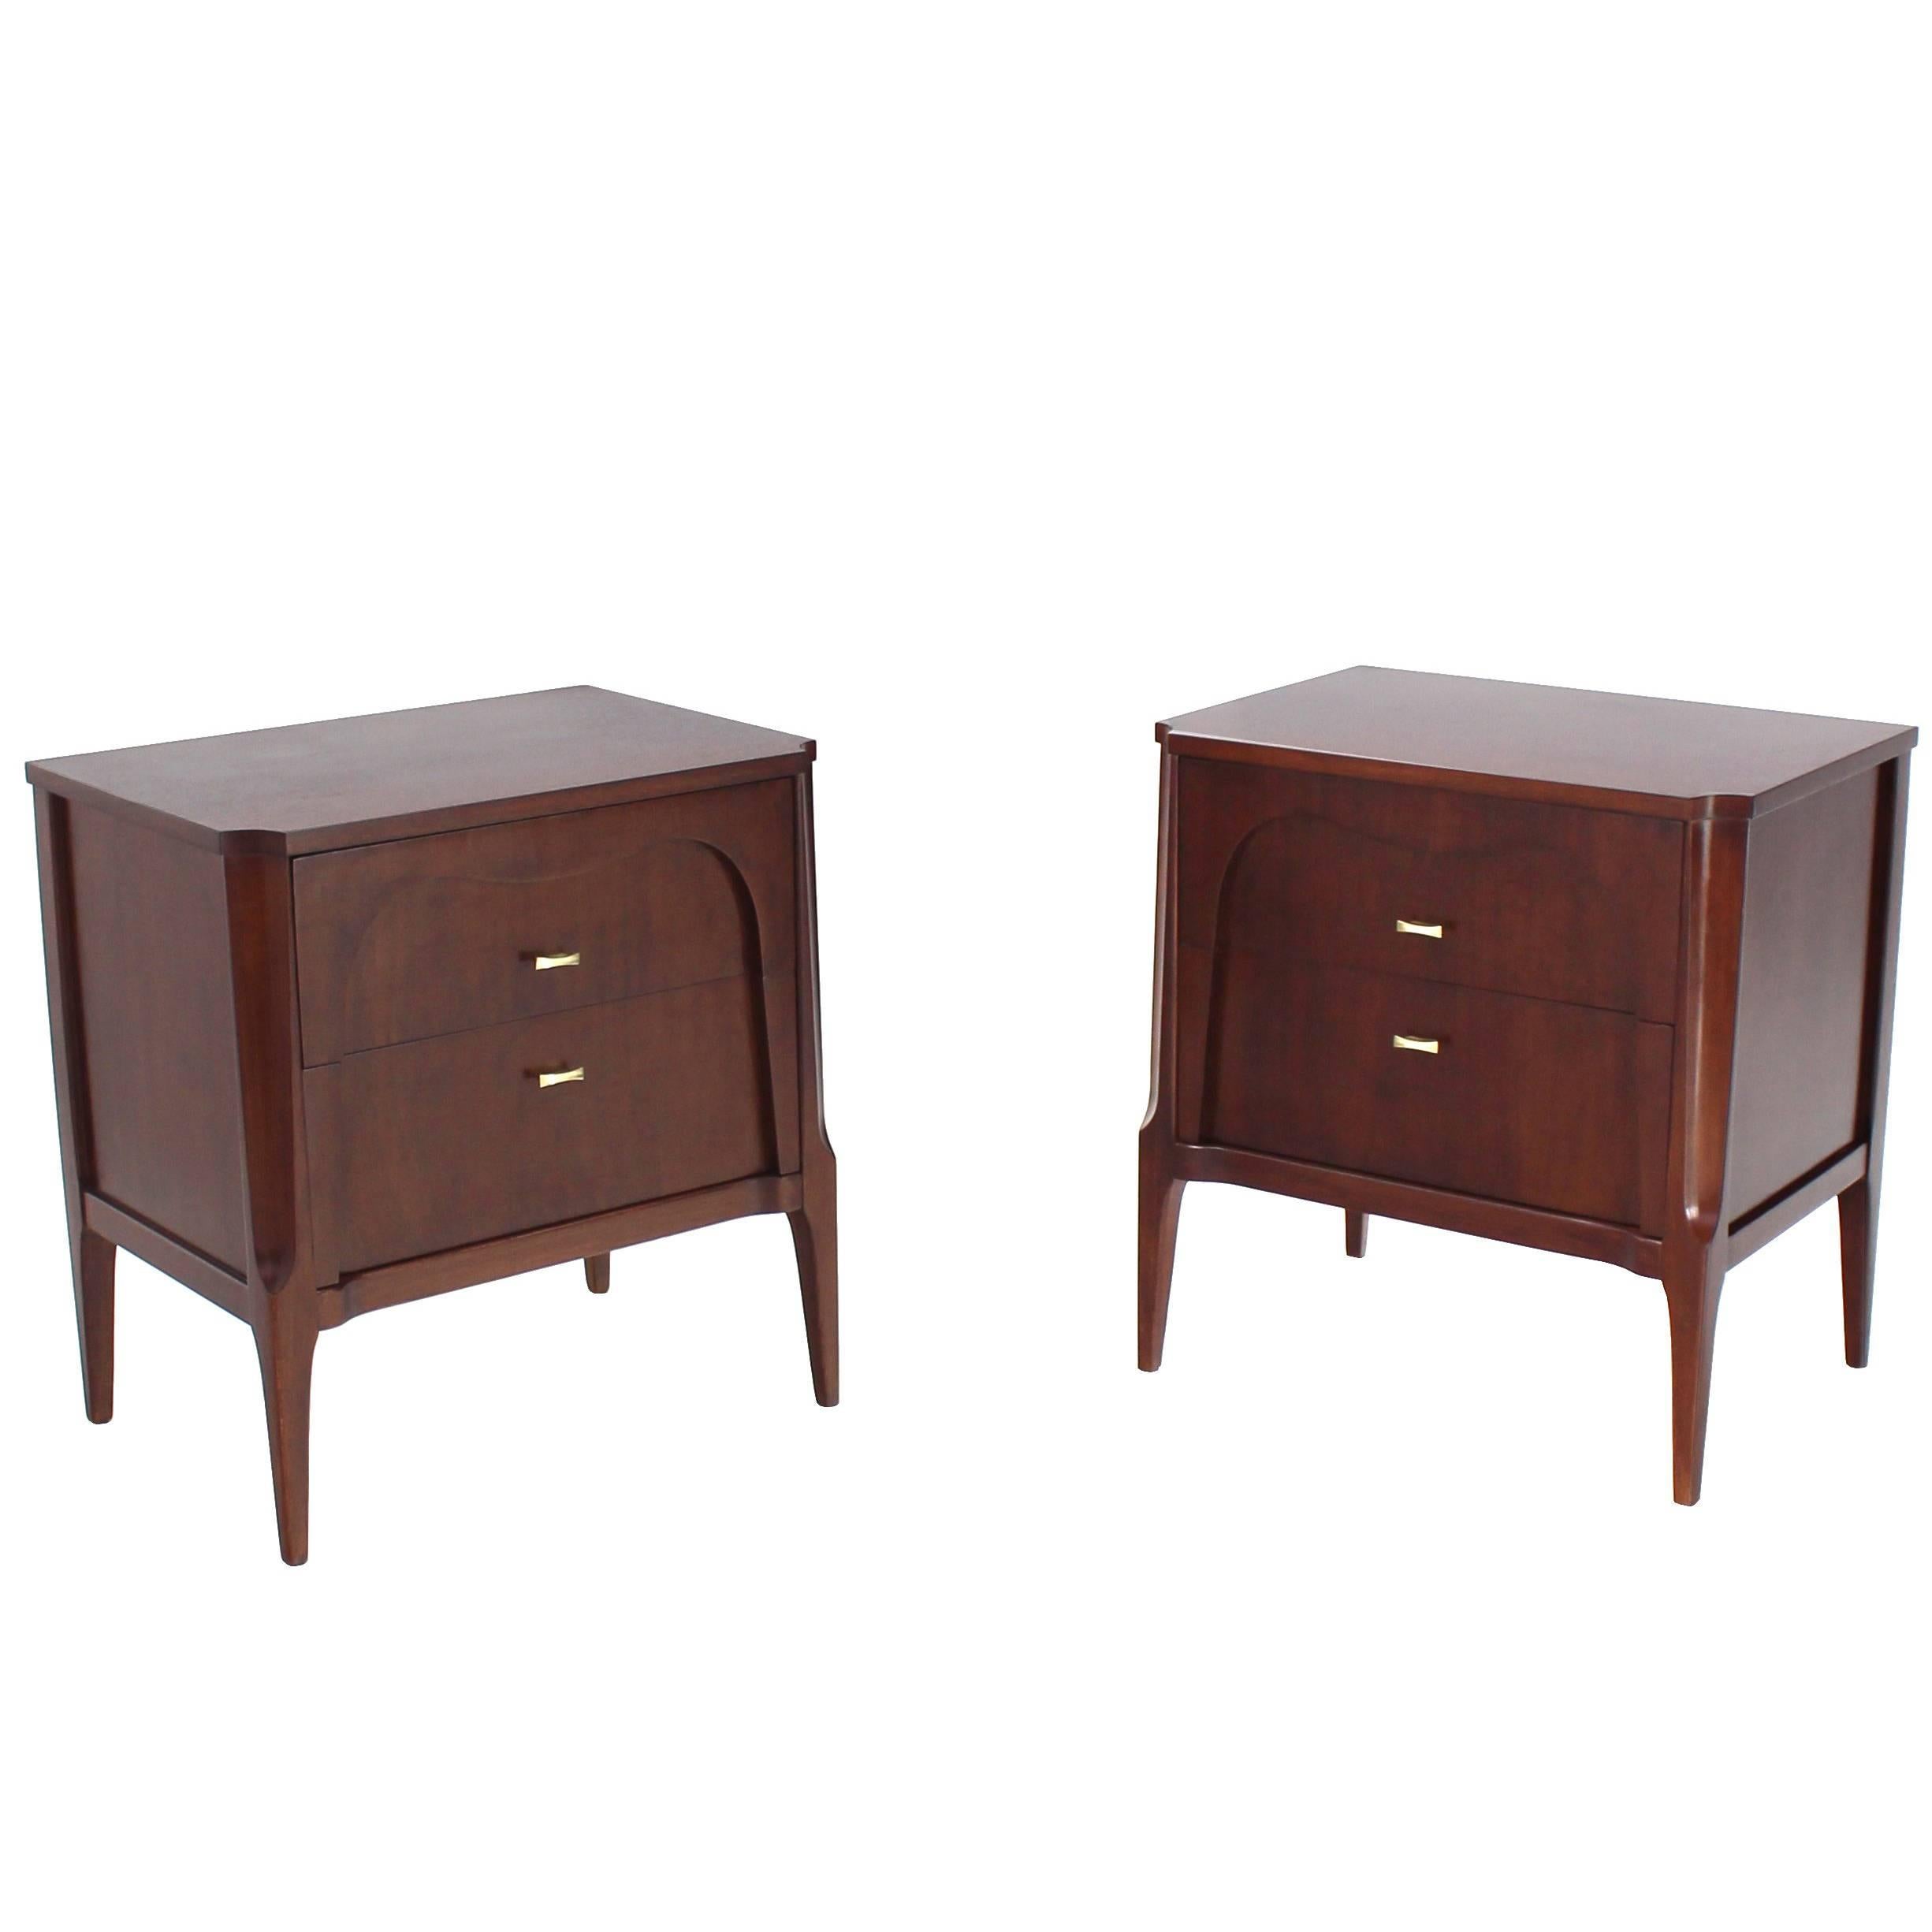 Pair of Sculptural Two Drawers Nightstands End Tables